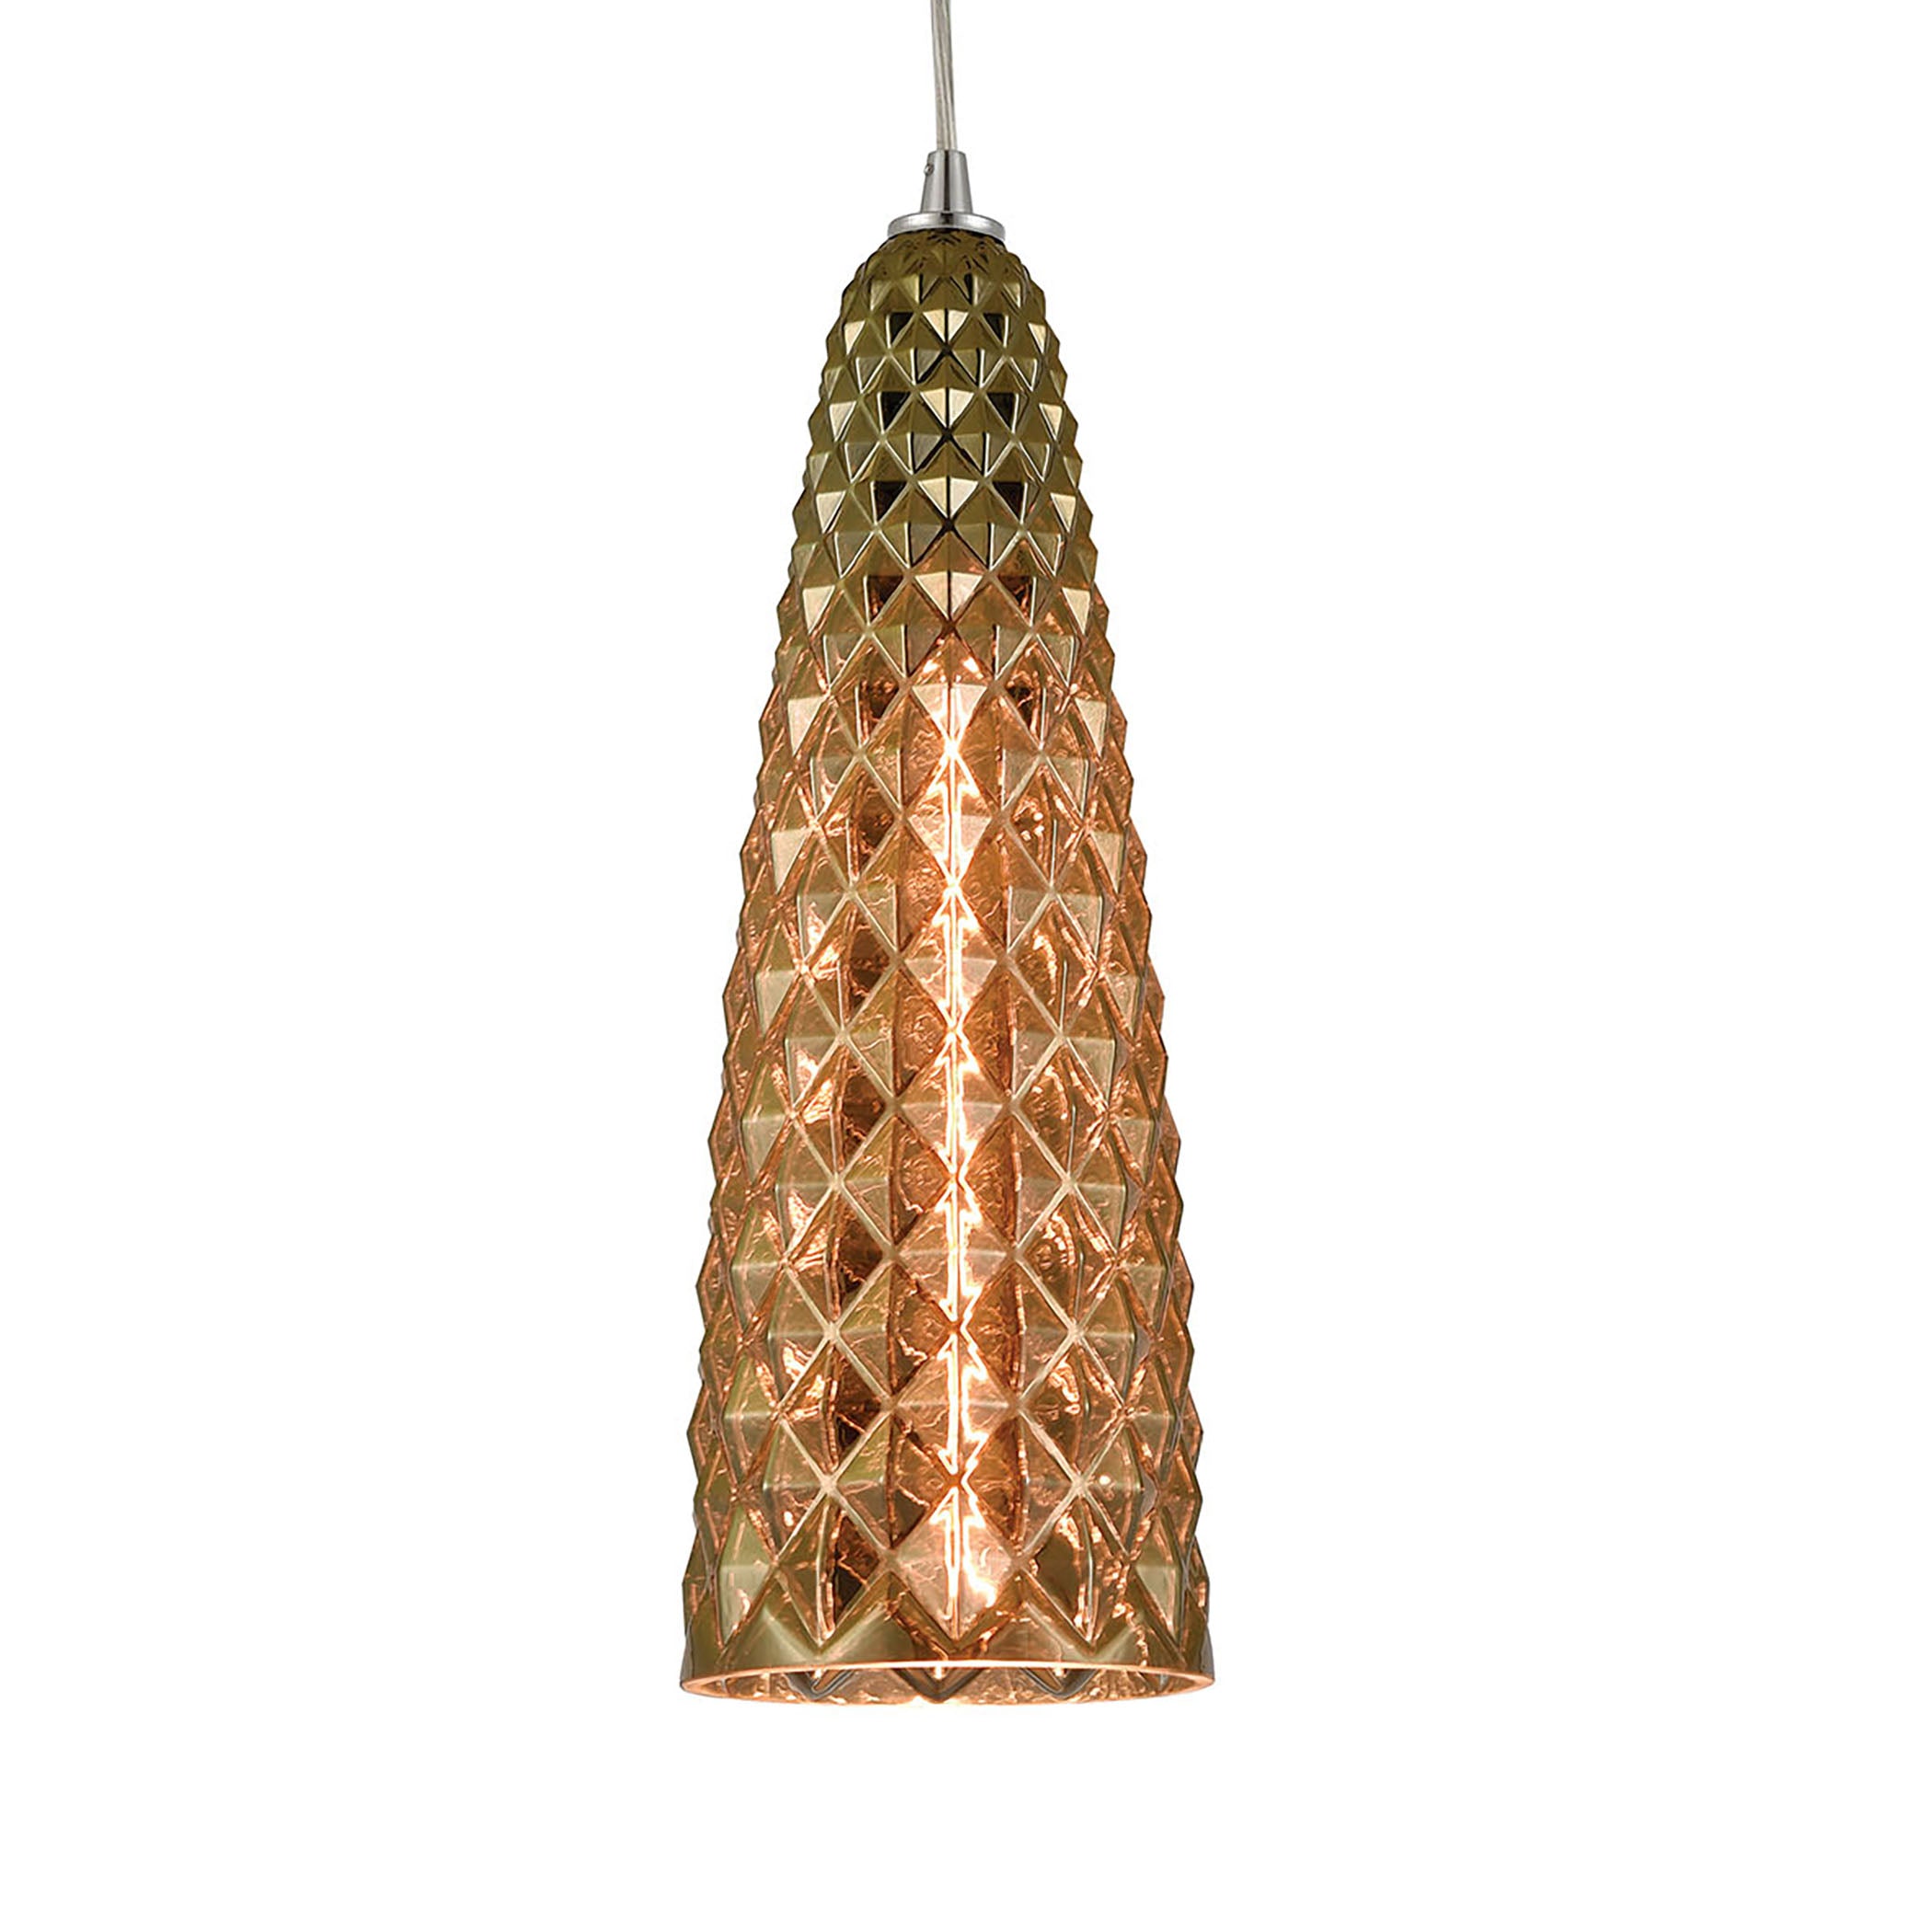 ELK Lighting 21168/1 Glitzy 1-Light Mini Pendant in Polished Chrome with Golden Bronze Plated Glass